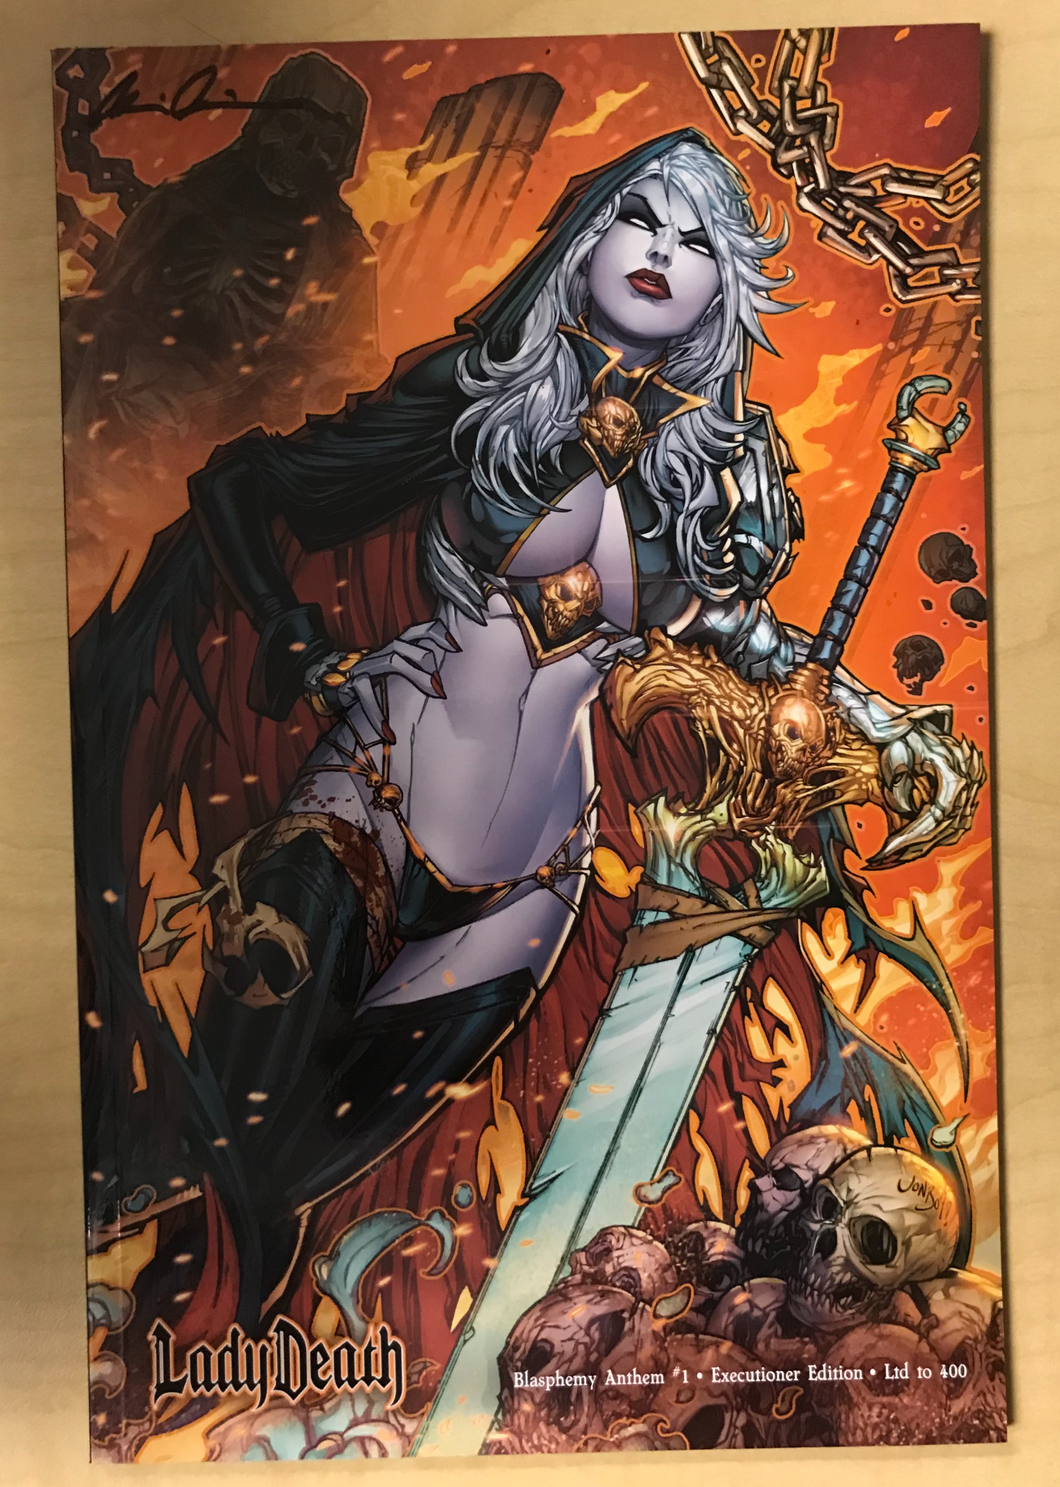 Lady Death: Blasphemy Anthem #1 Executioner Edition Variant Cover by Jonboy Meyers Signed by Brian Pulido w/ COA Limited to Only 400 Copies Kickstarter Exclusive!!!